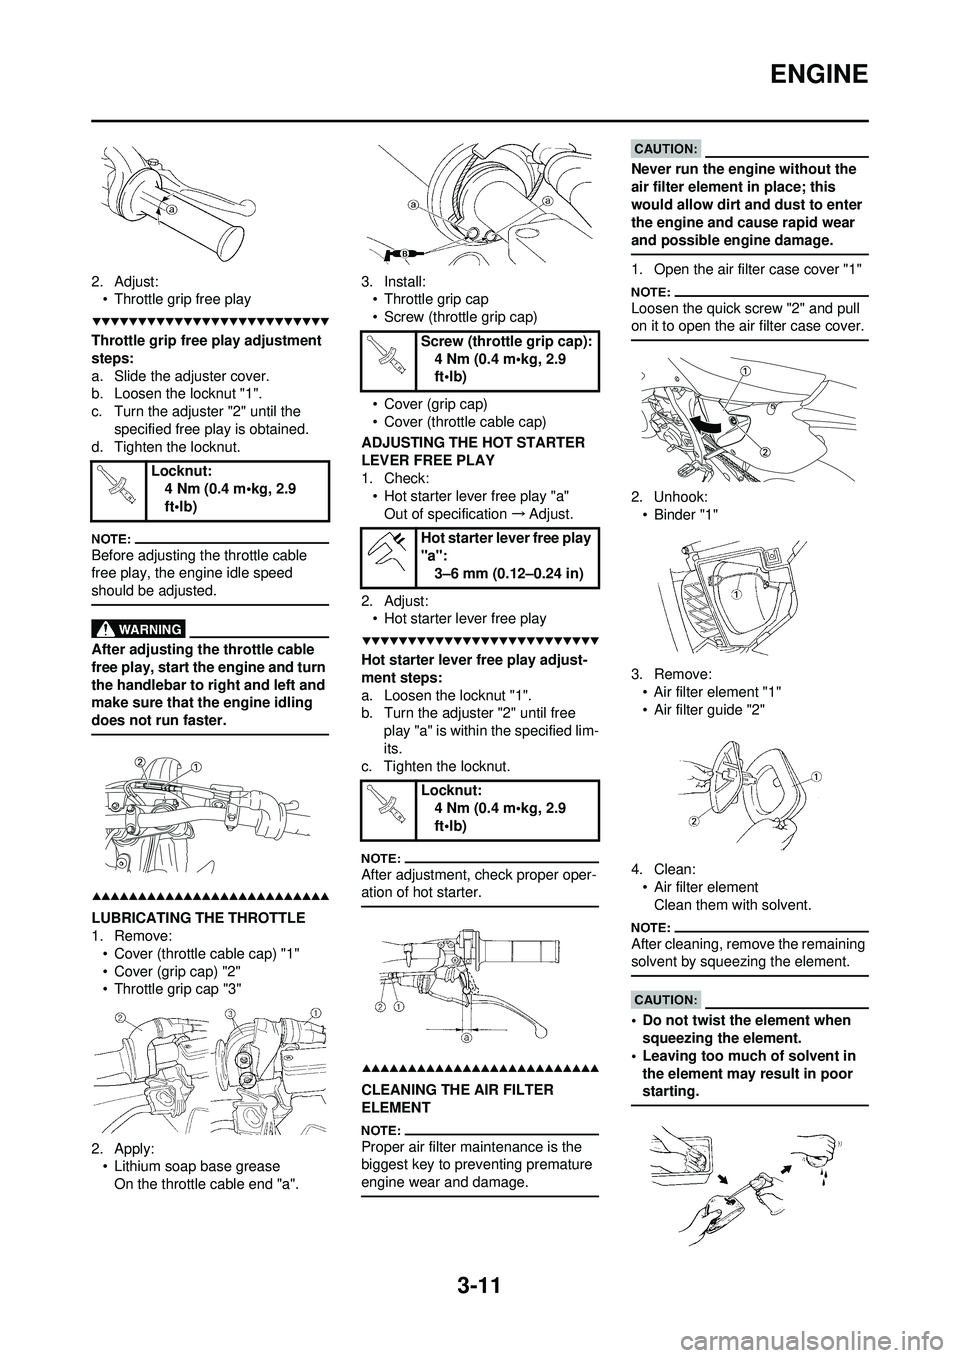 YAMAHA WR 250F 2008  Owners Manual 3-11
ENGINE
2. Adjust:• Throttle grip free play
Throttle grip free play adjustment 
steps:
a. Slide the adjuster cover.
b. Loosen the locknut "1".
c. Turn the adjuster "2" until the 
specified free 